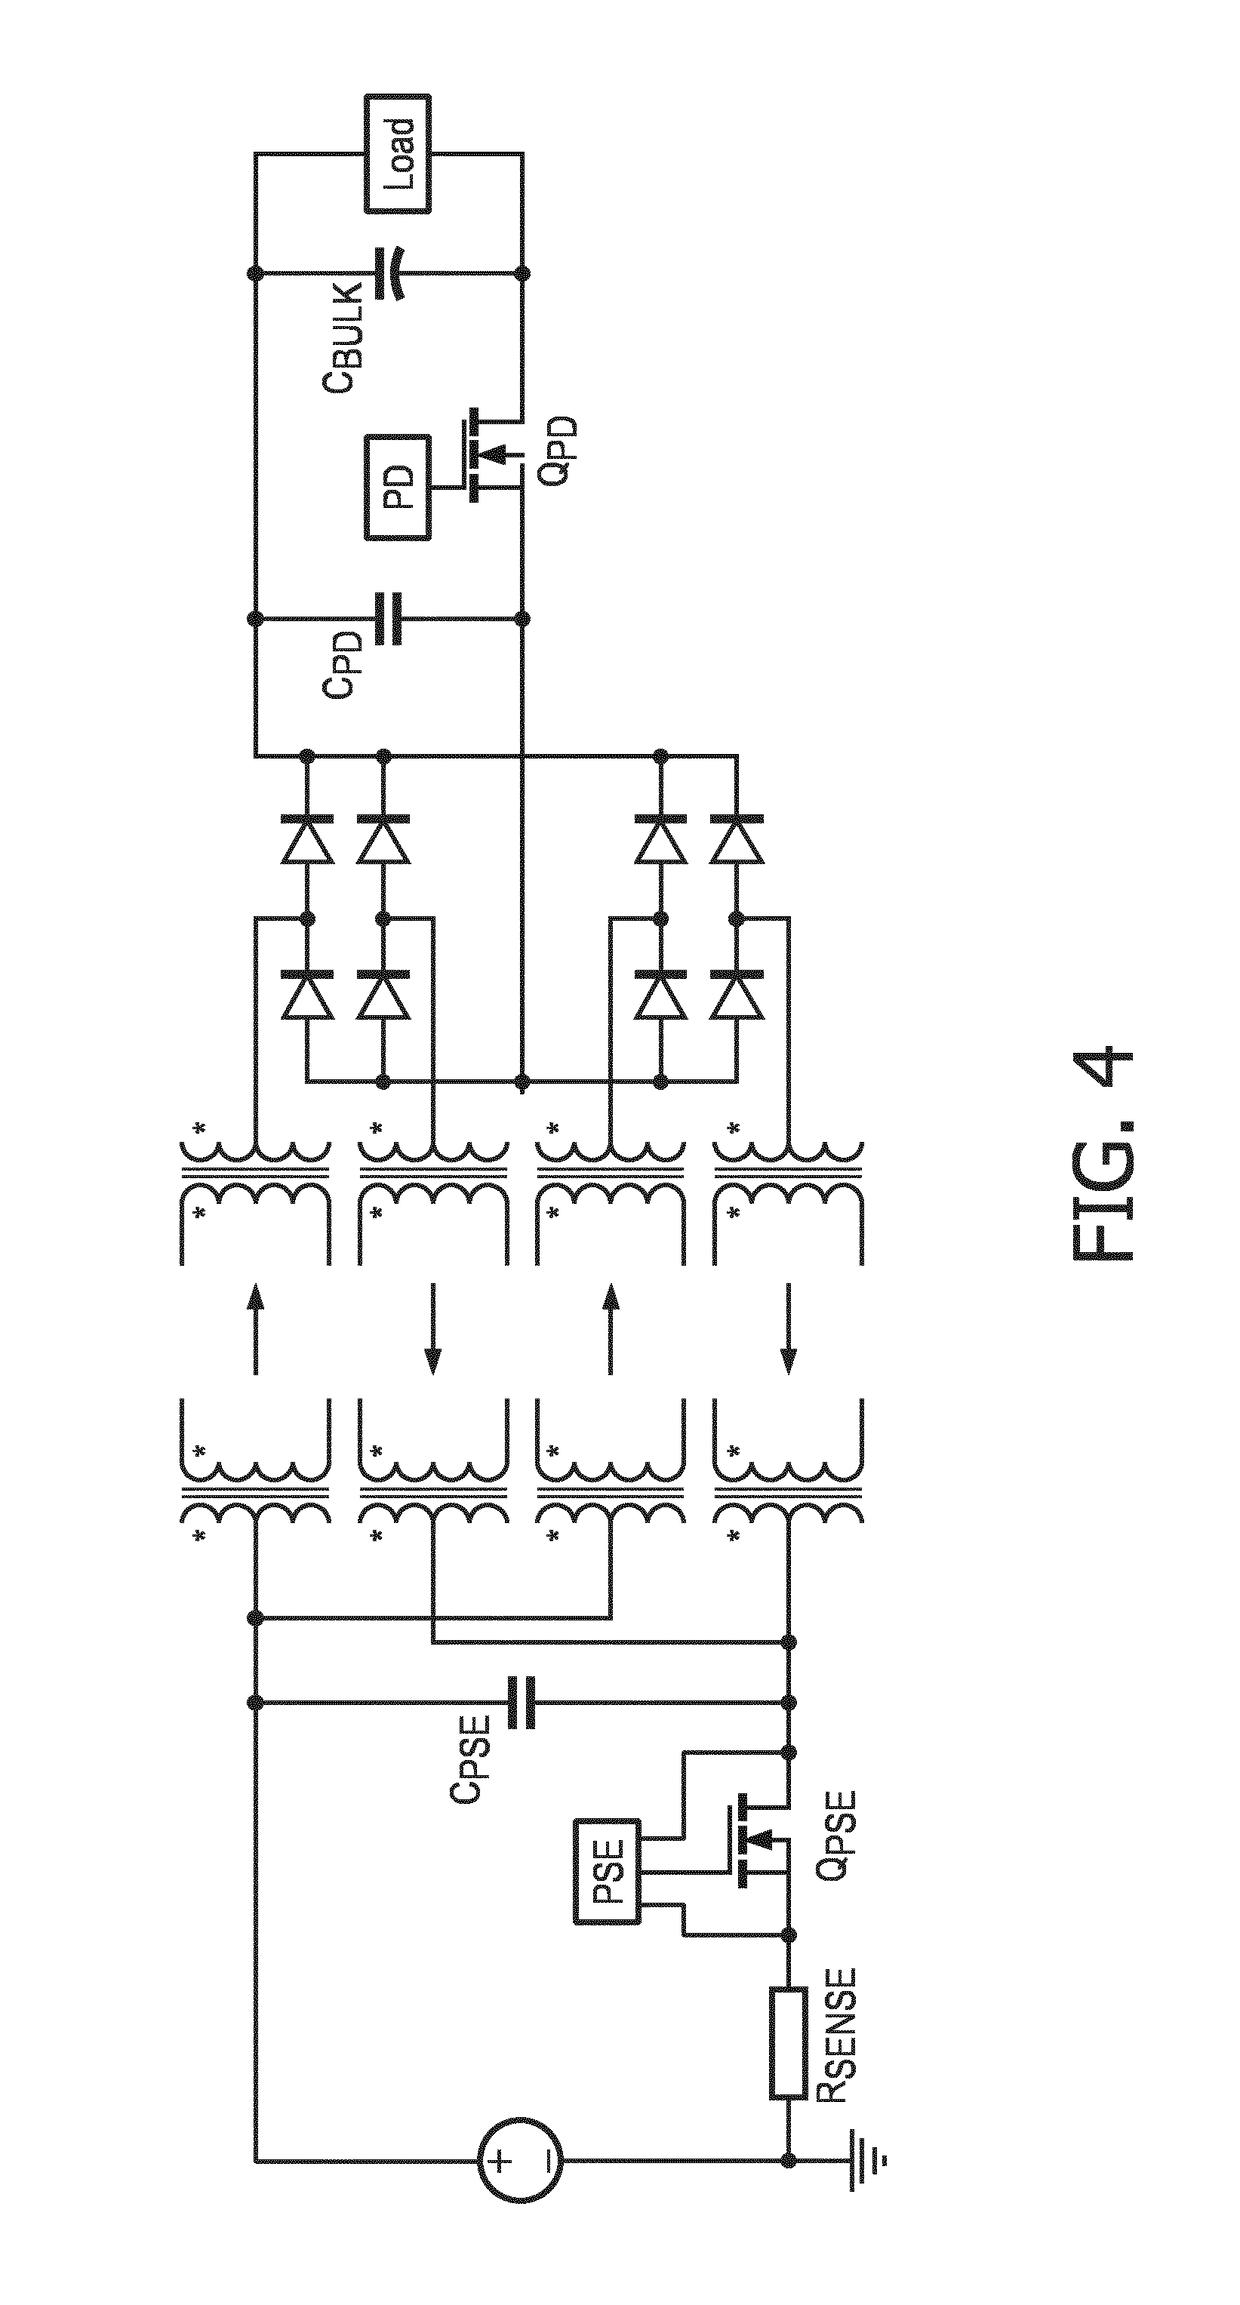 Low power standby for a powered device in a power distribution system